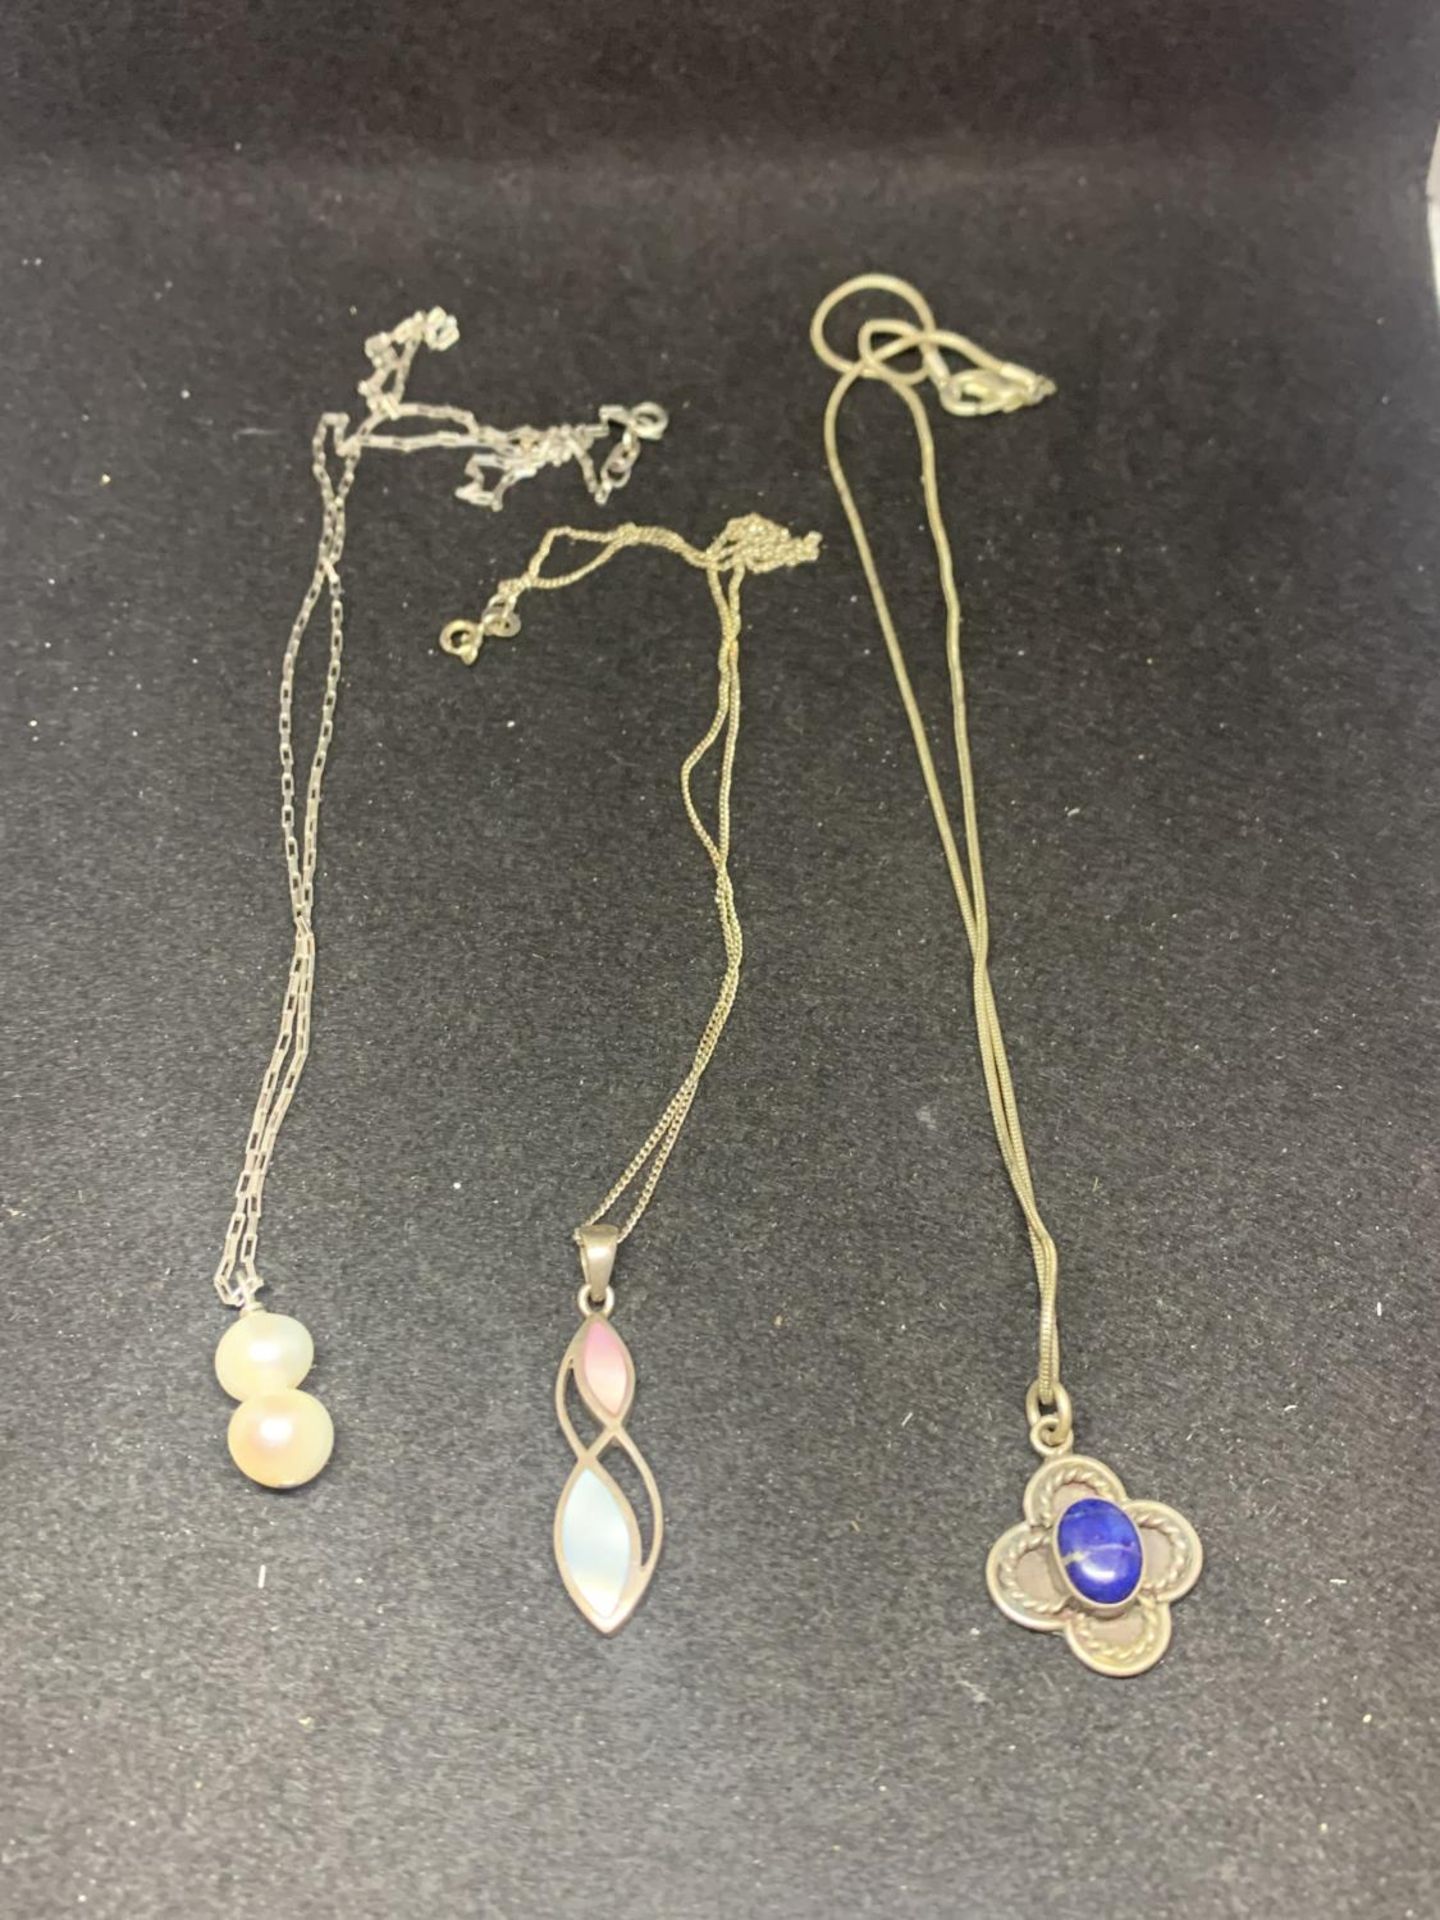 THREE SILVER NECKLACES WITH PENDANTS TO INCLUDE A BLUE STONE FLOWER DESIGN, PEARLS ETC